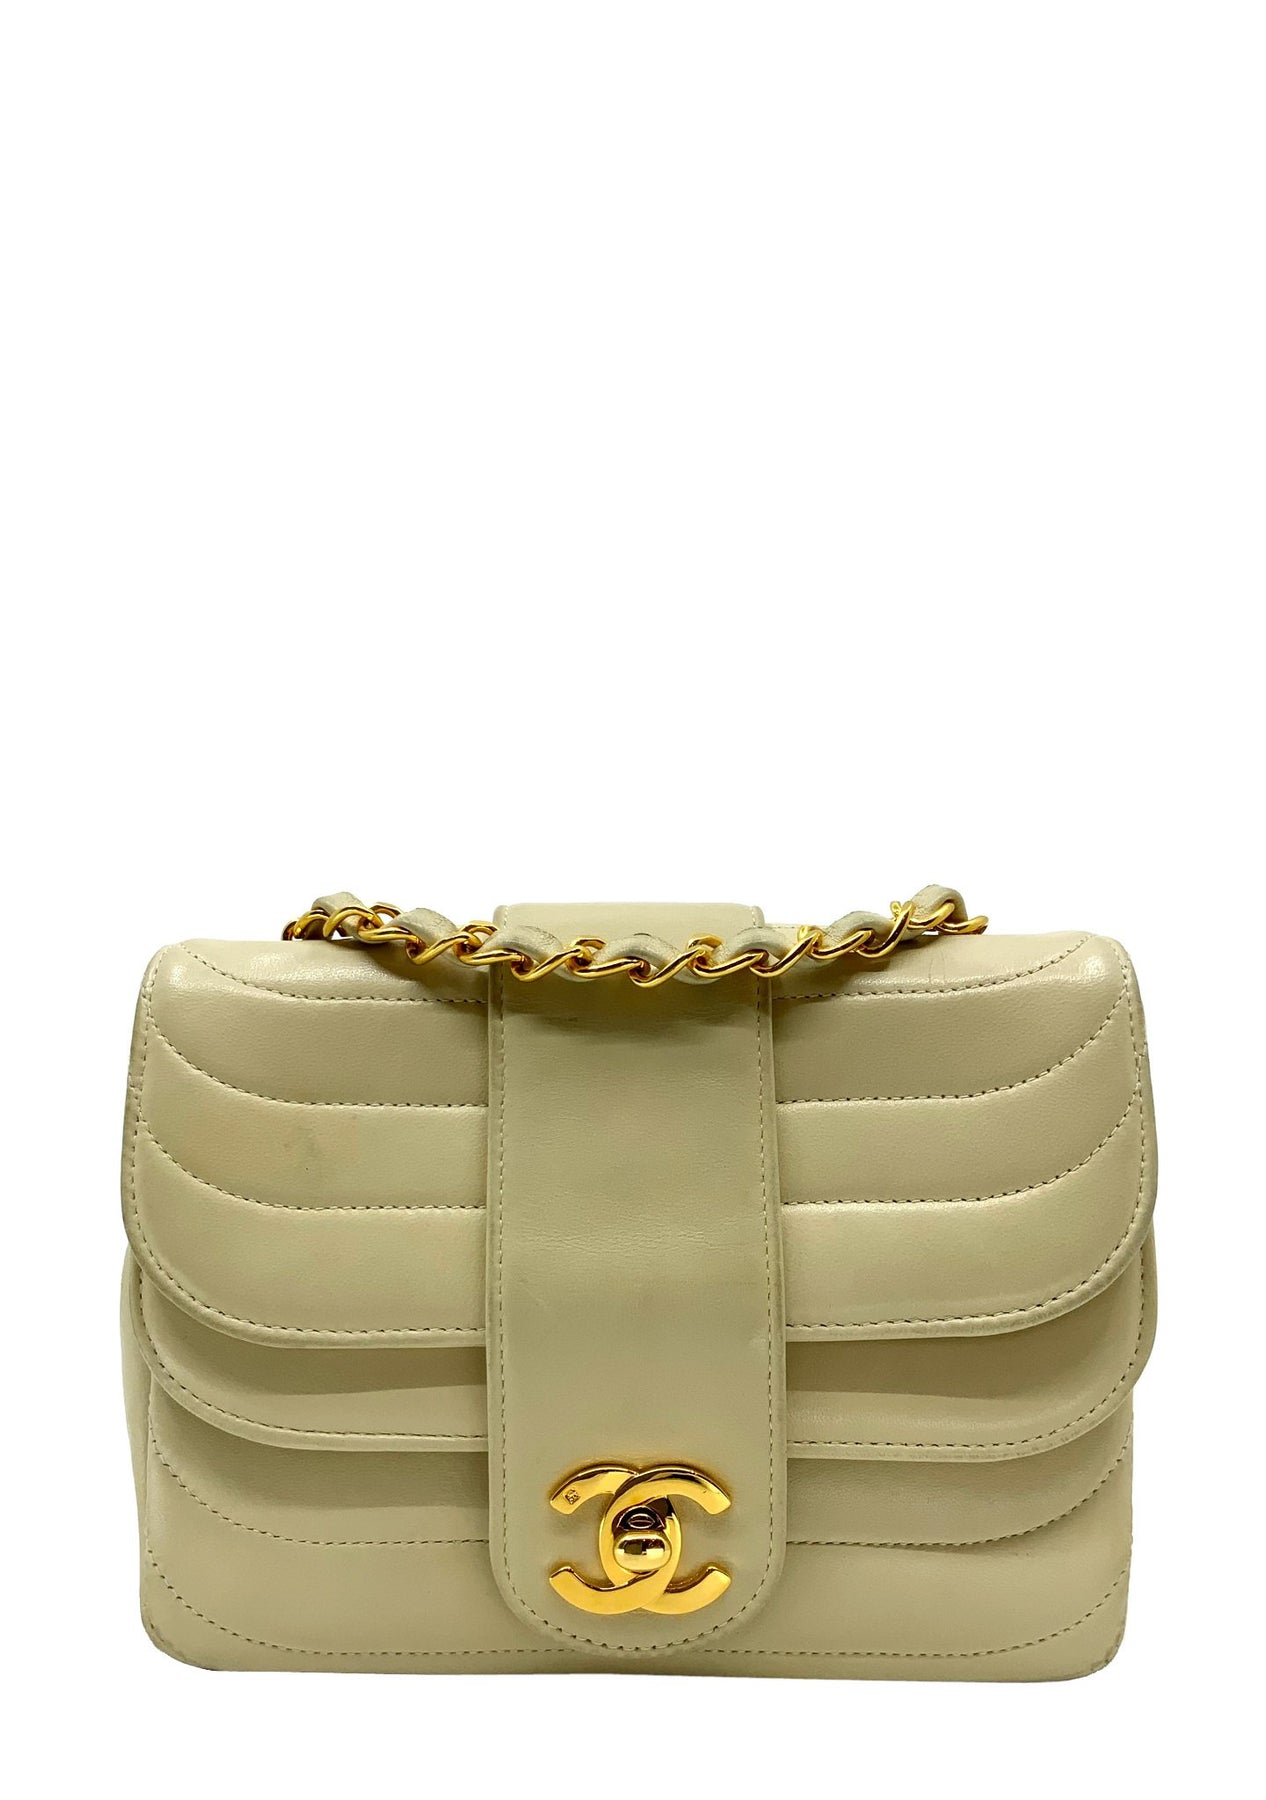 CHANEL Handbag Timeless Lambskin Quilted Horizontal & Vertical Vintage 90s  - Chelsea Vintage Couture